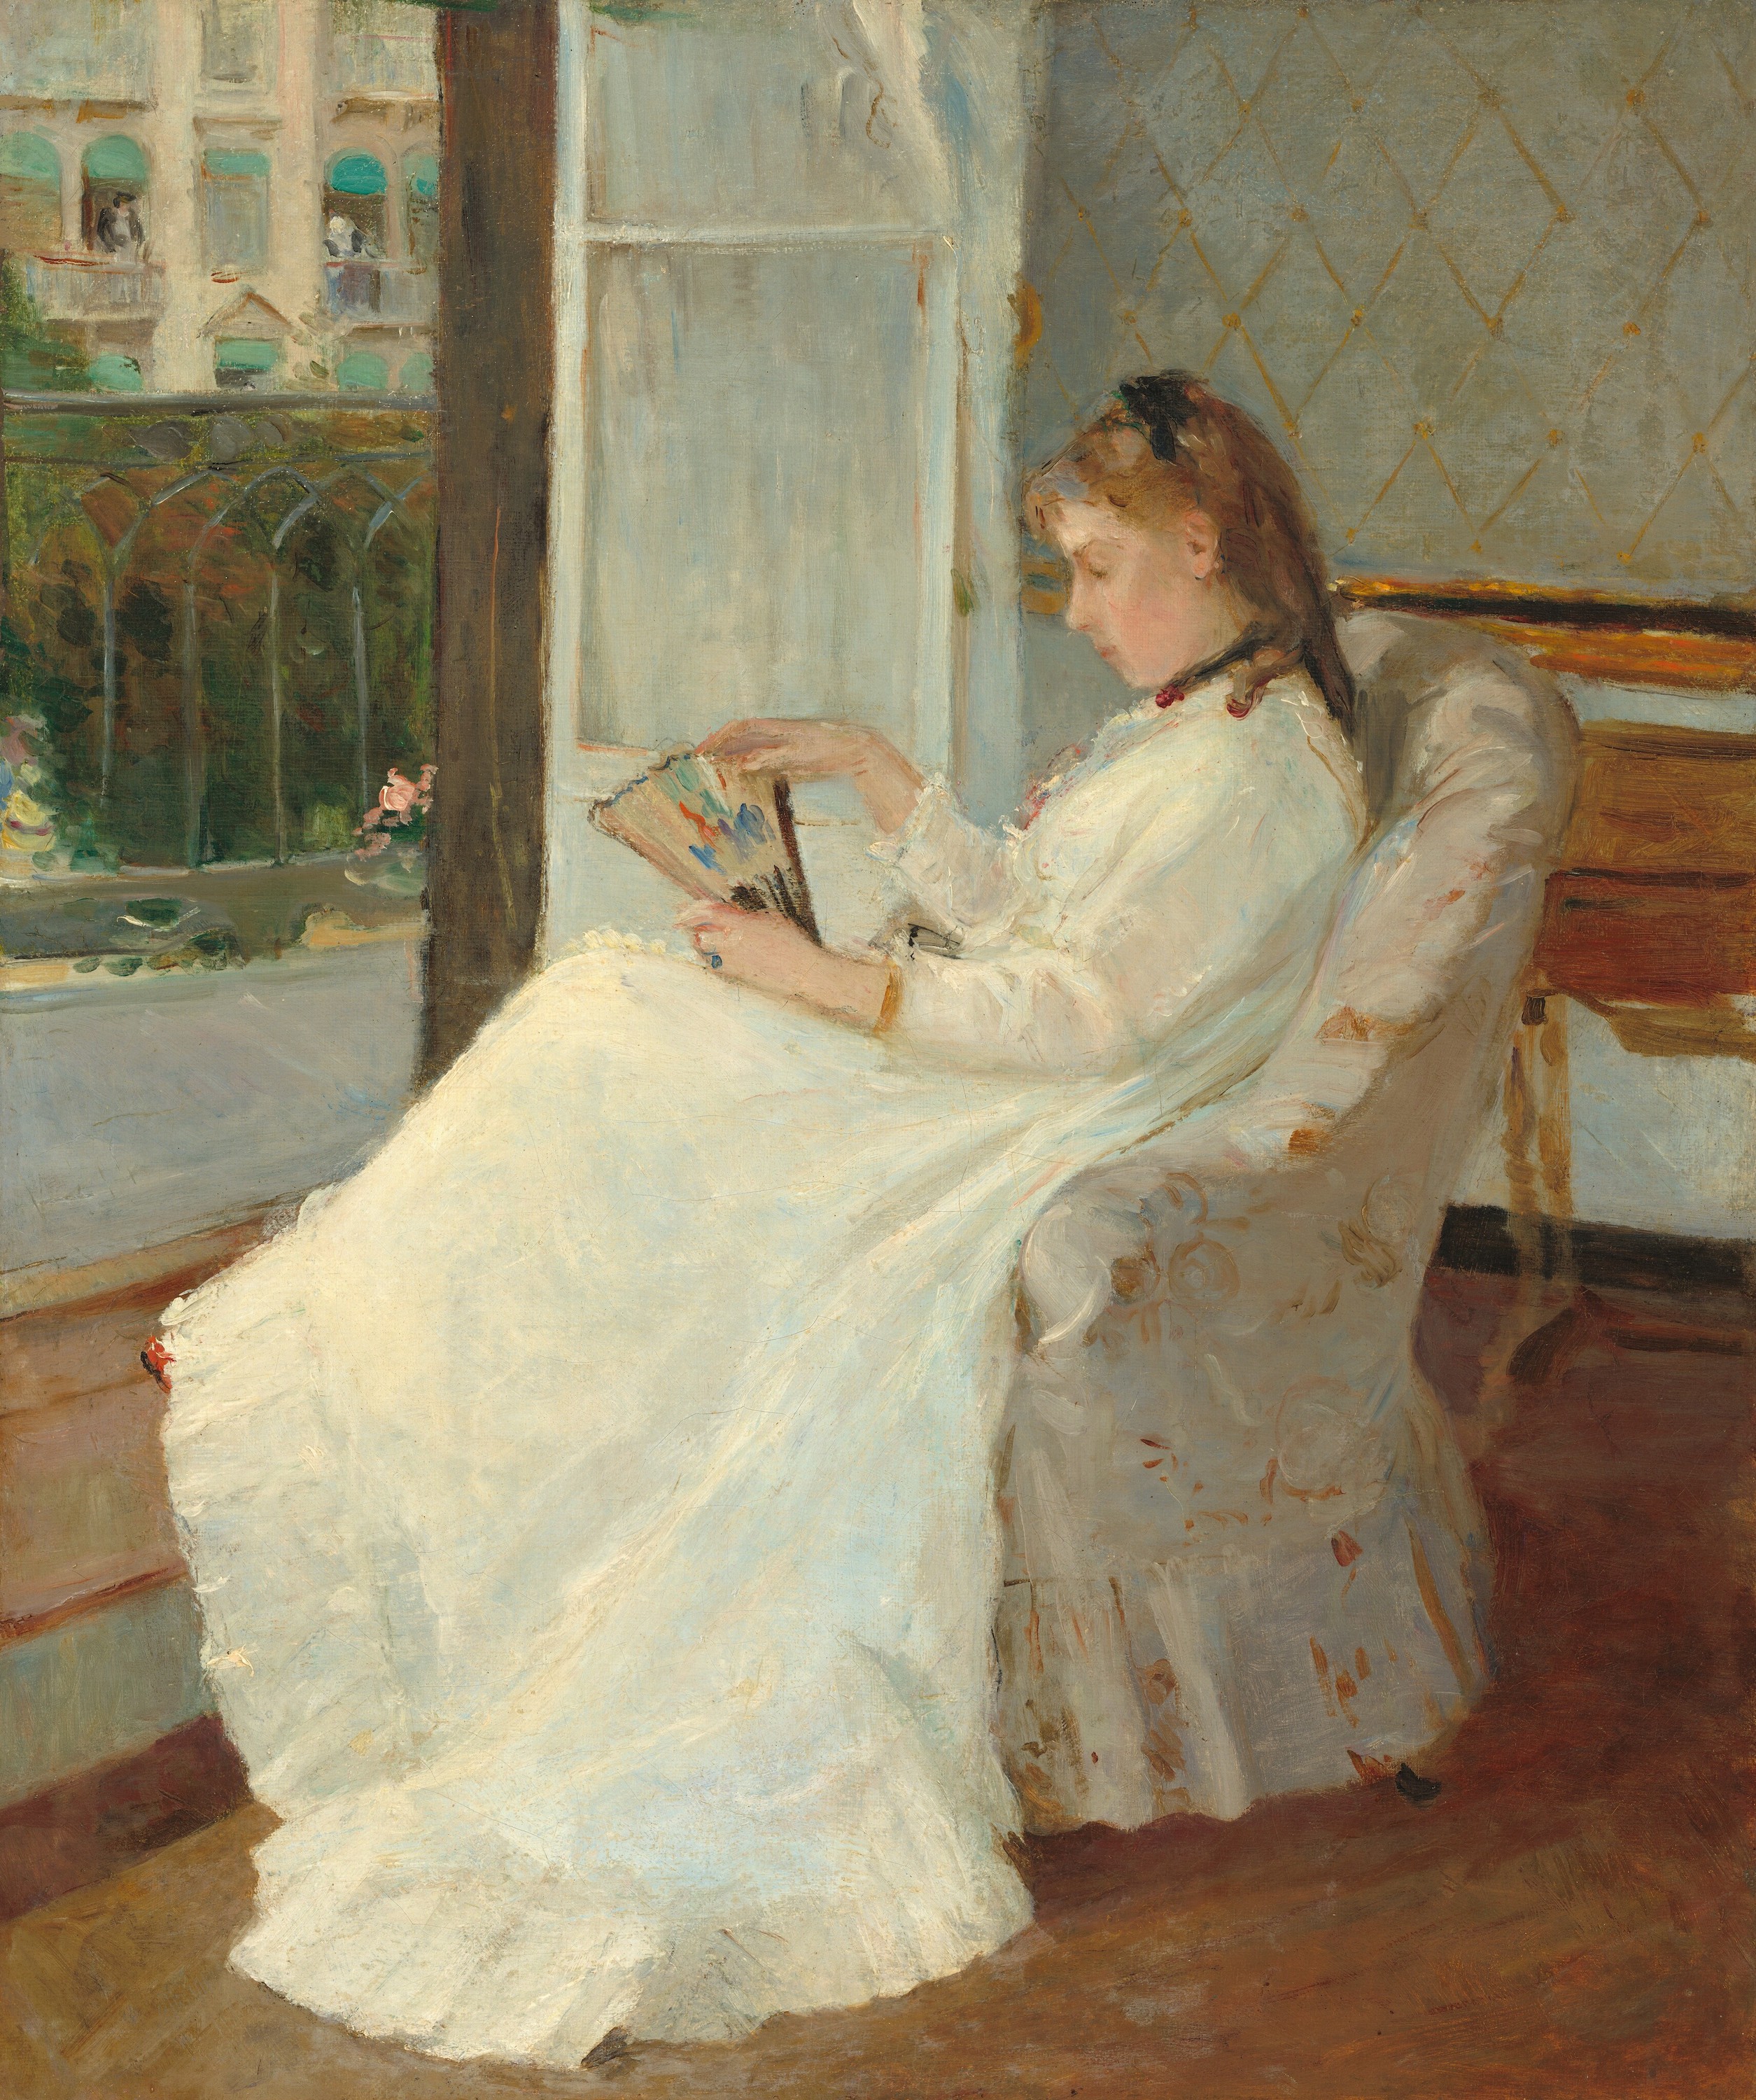 The Artist's Sister at a Window by Berthe Morisot - 1869 - 54.8 x 46.3 cm National Gallery of Art